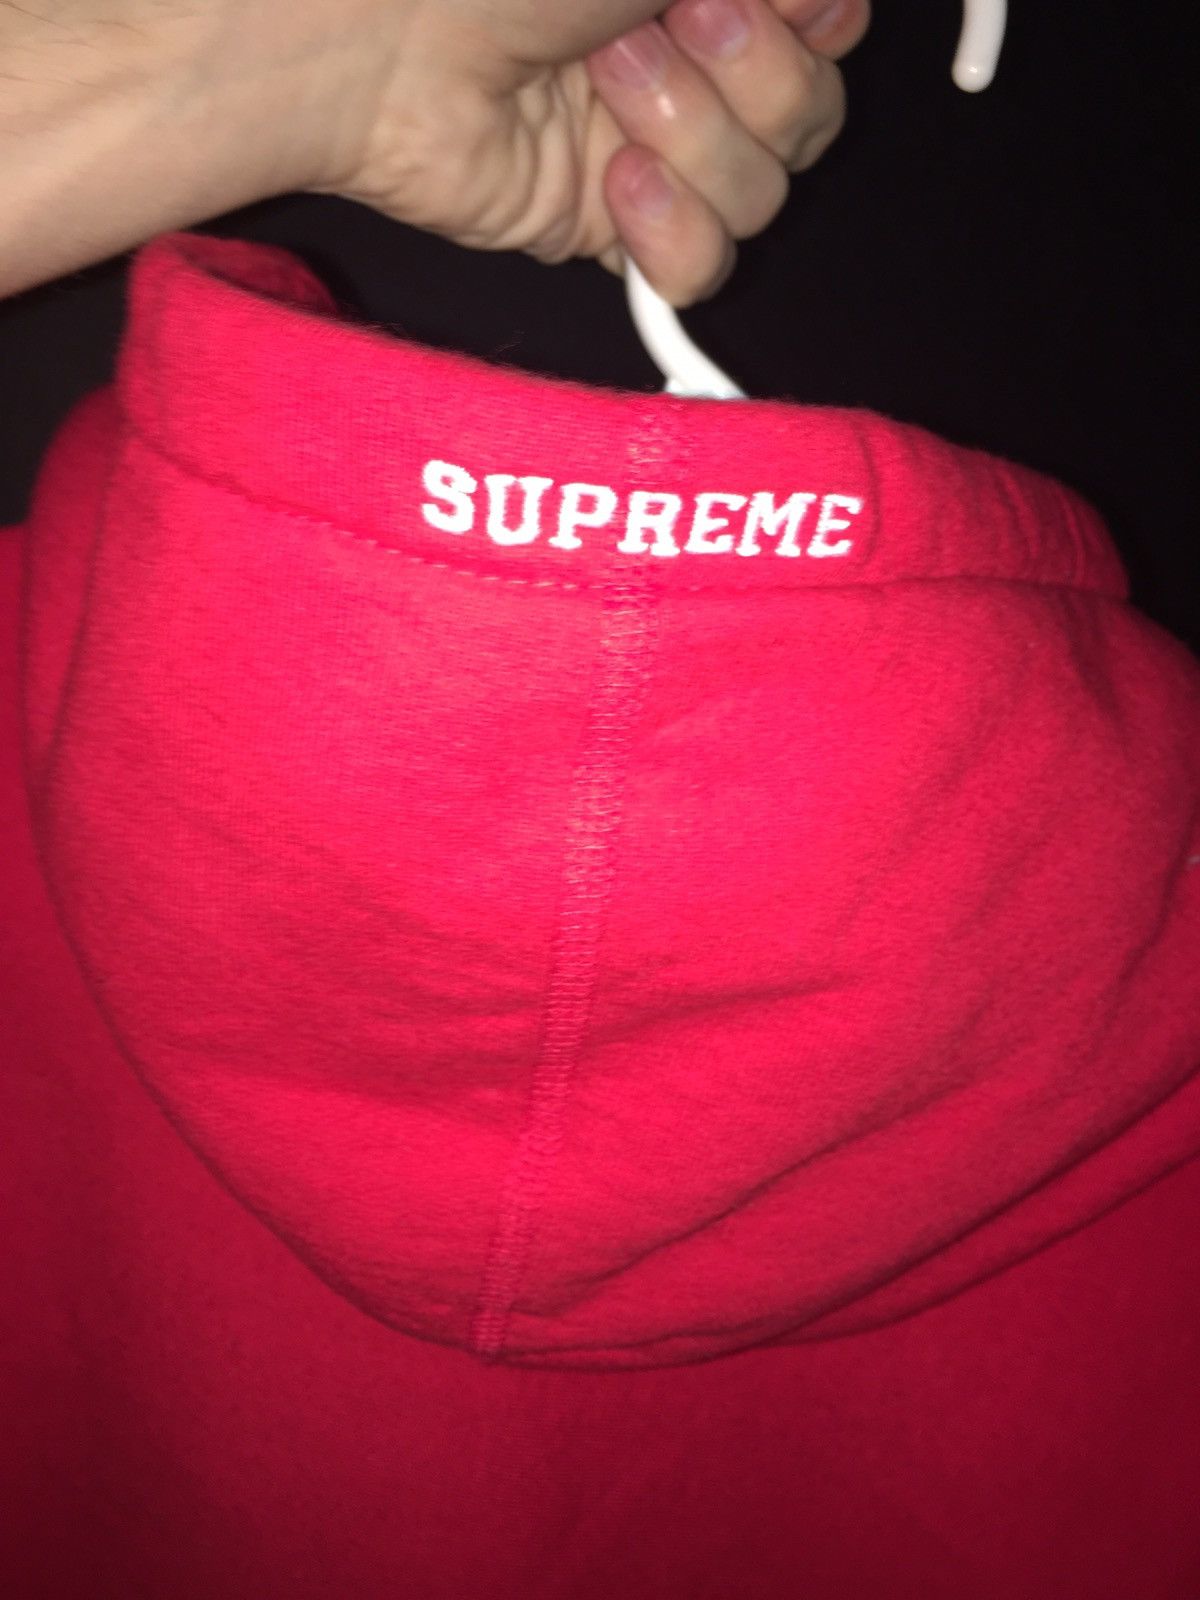 Supreme 3M Reflective S Logo Hoodie - Red Size US M / EU 48-50 / 2 - 4 Preview